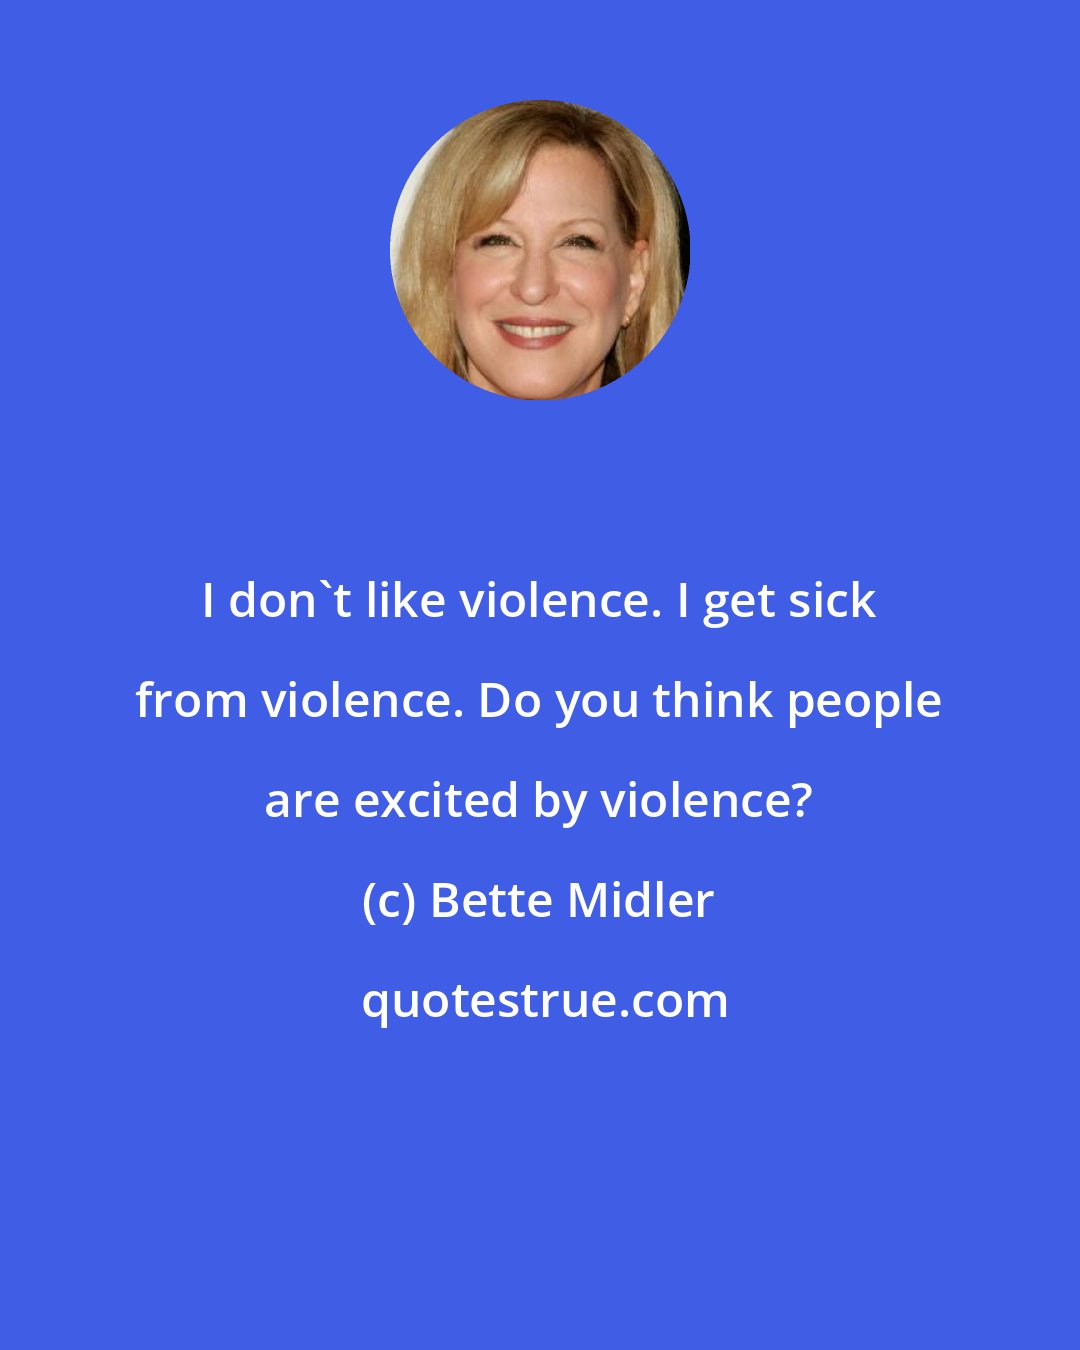 Bette Midler: I don't like violence. I get sick from violence. Do you think people are excited by violence?